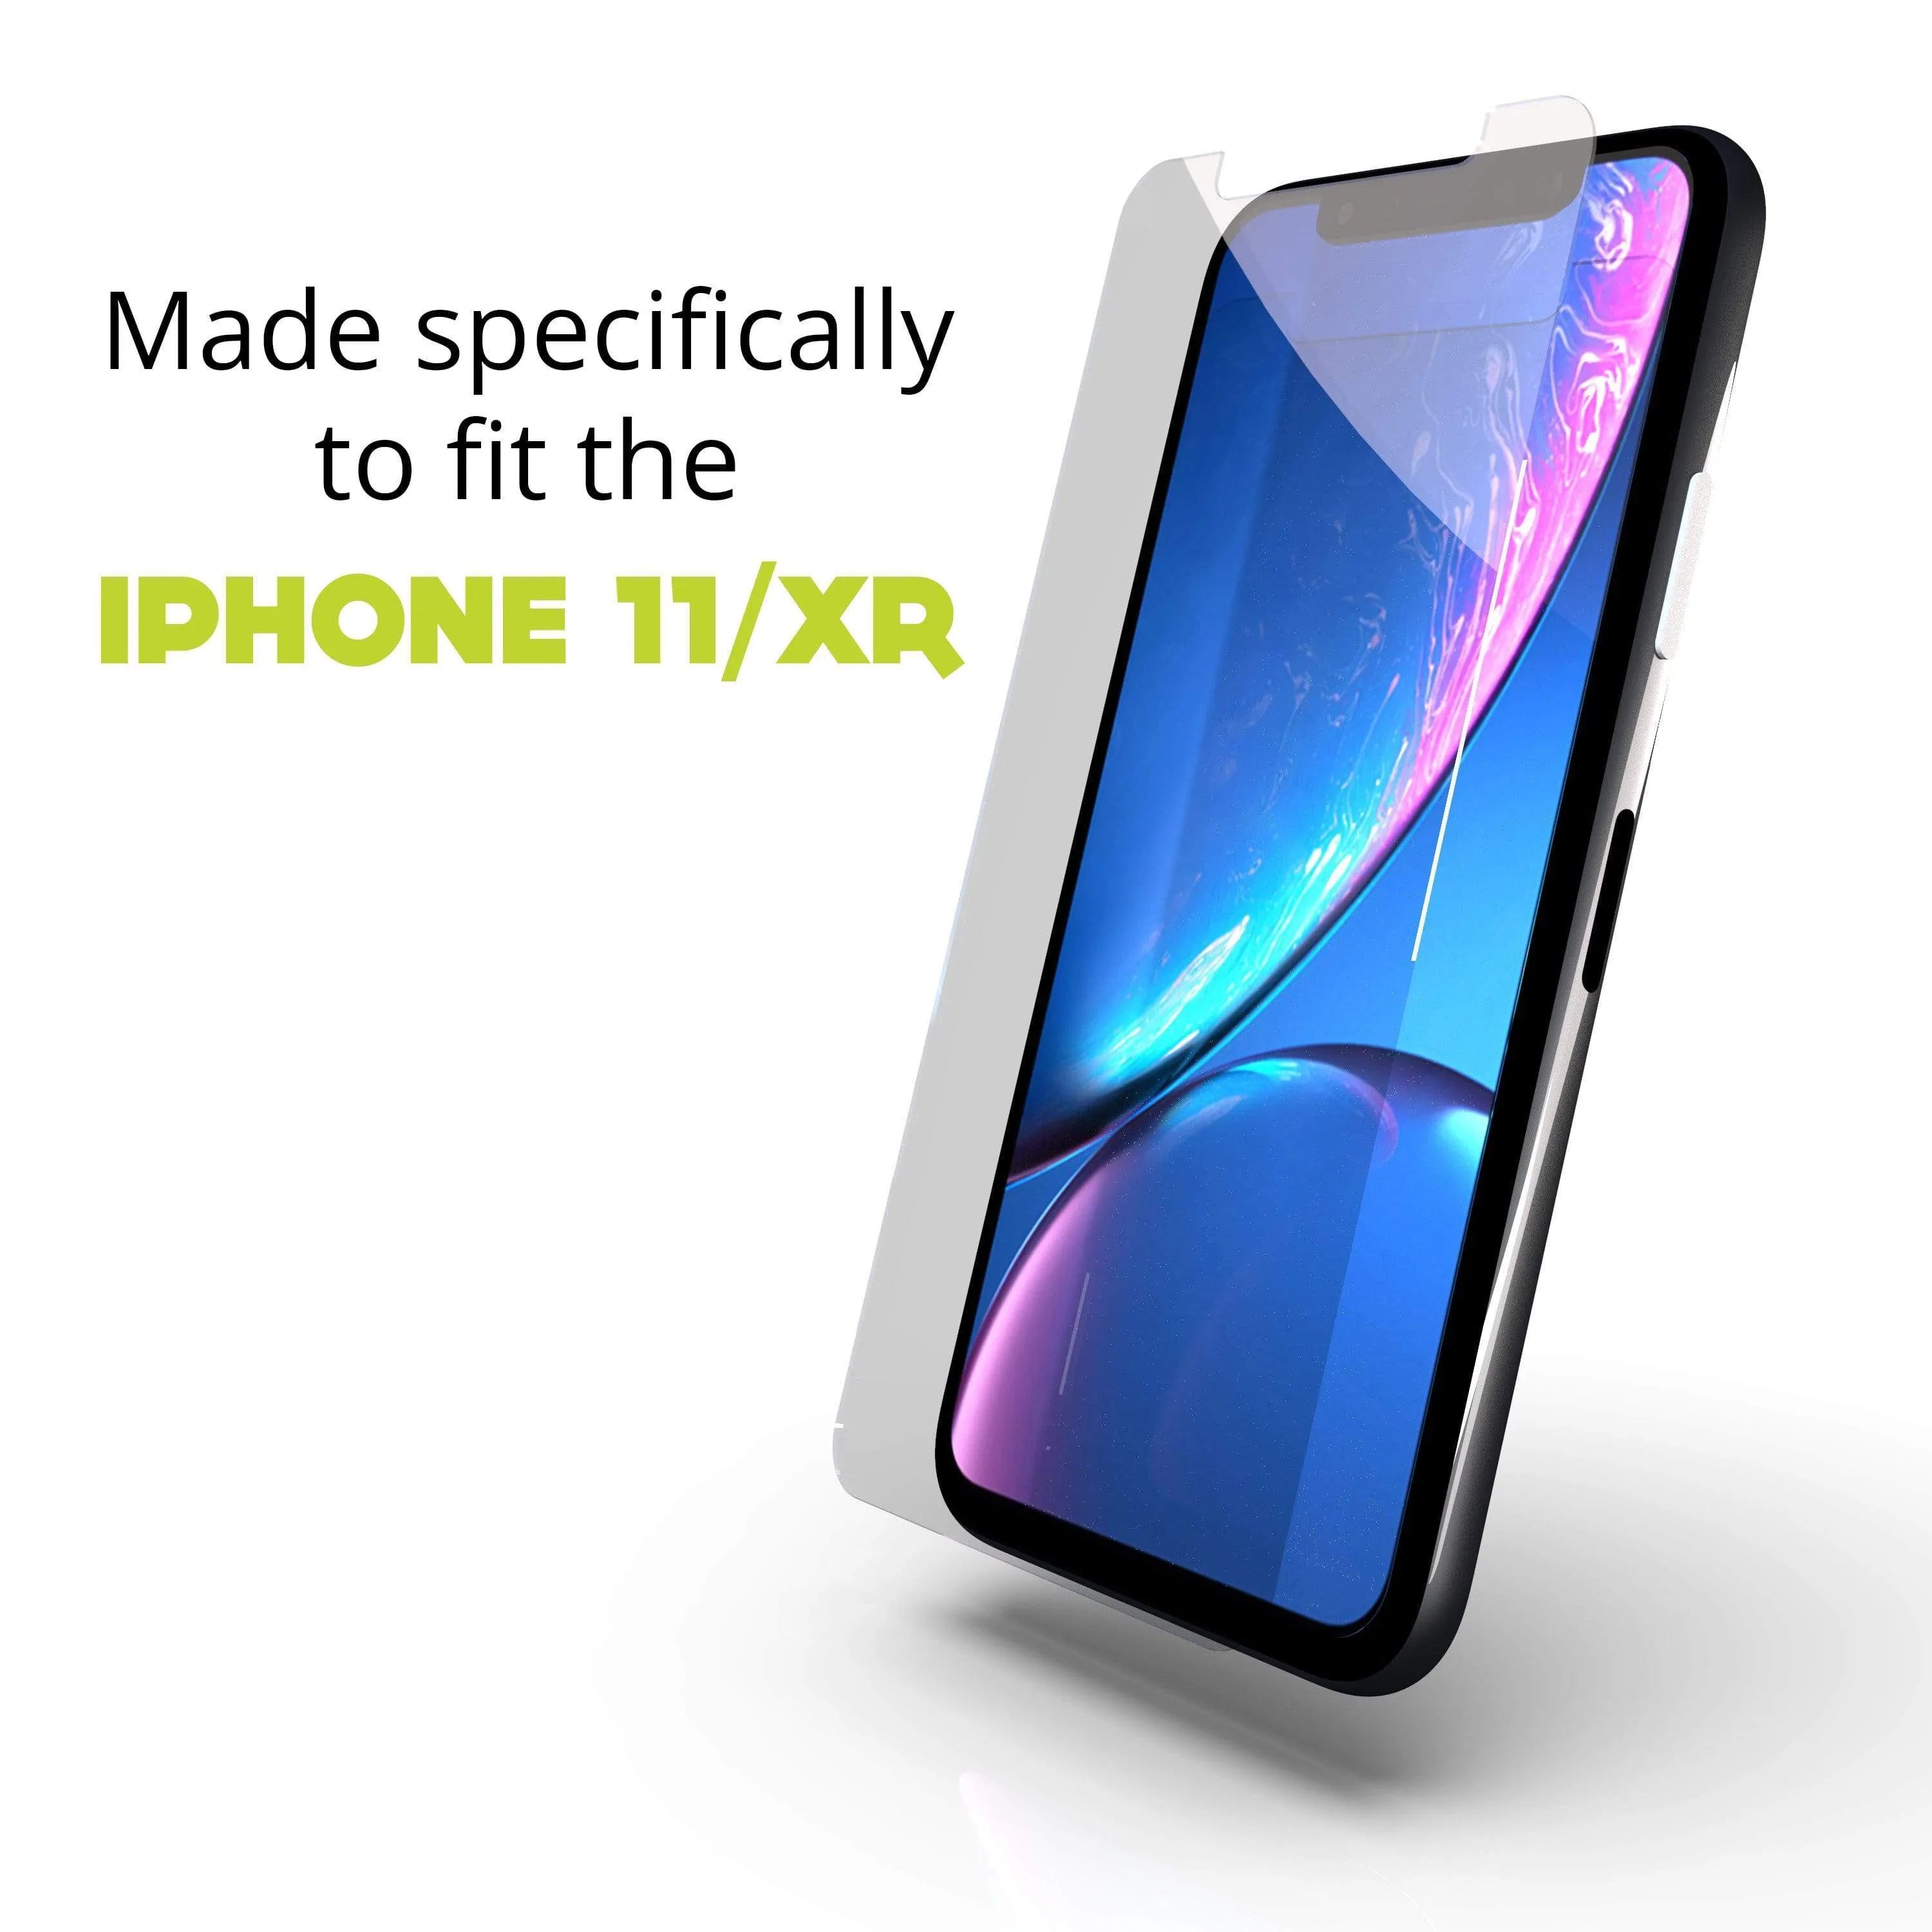 Fortress iPhone 11 Screen Protector - $200 Device Coverage  Scooch Screen Protector